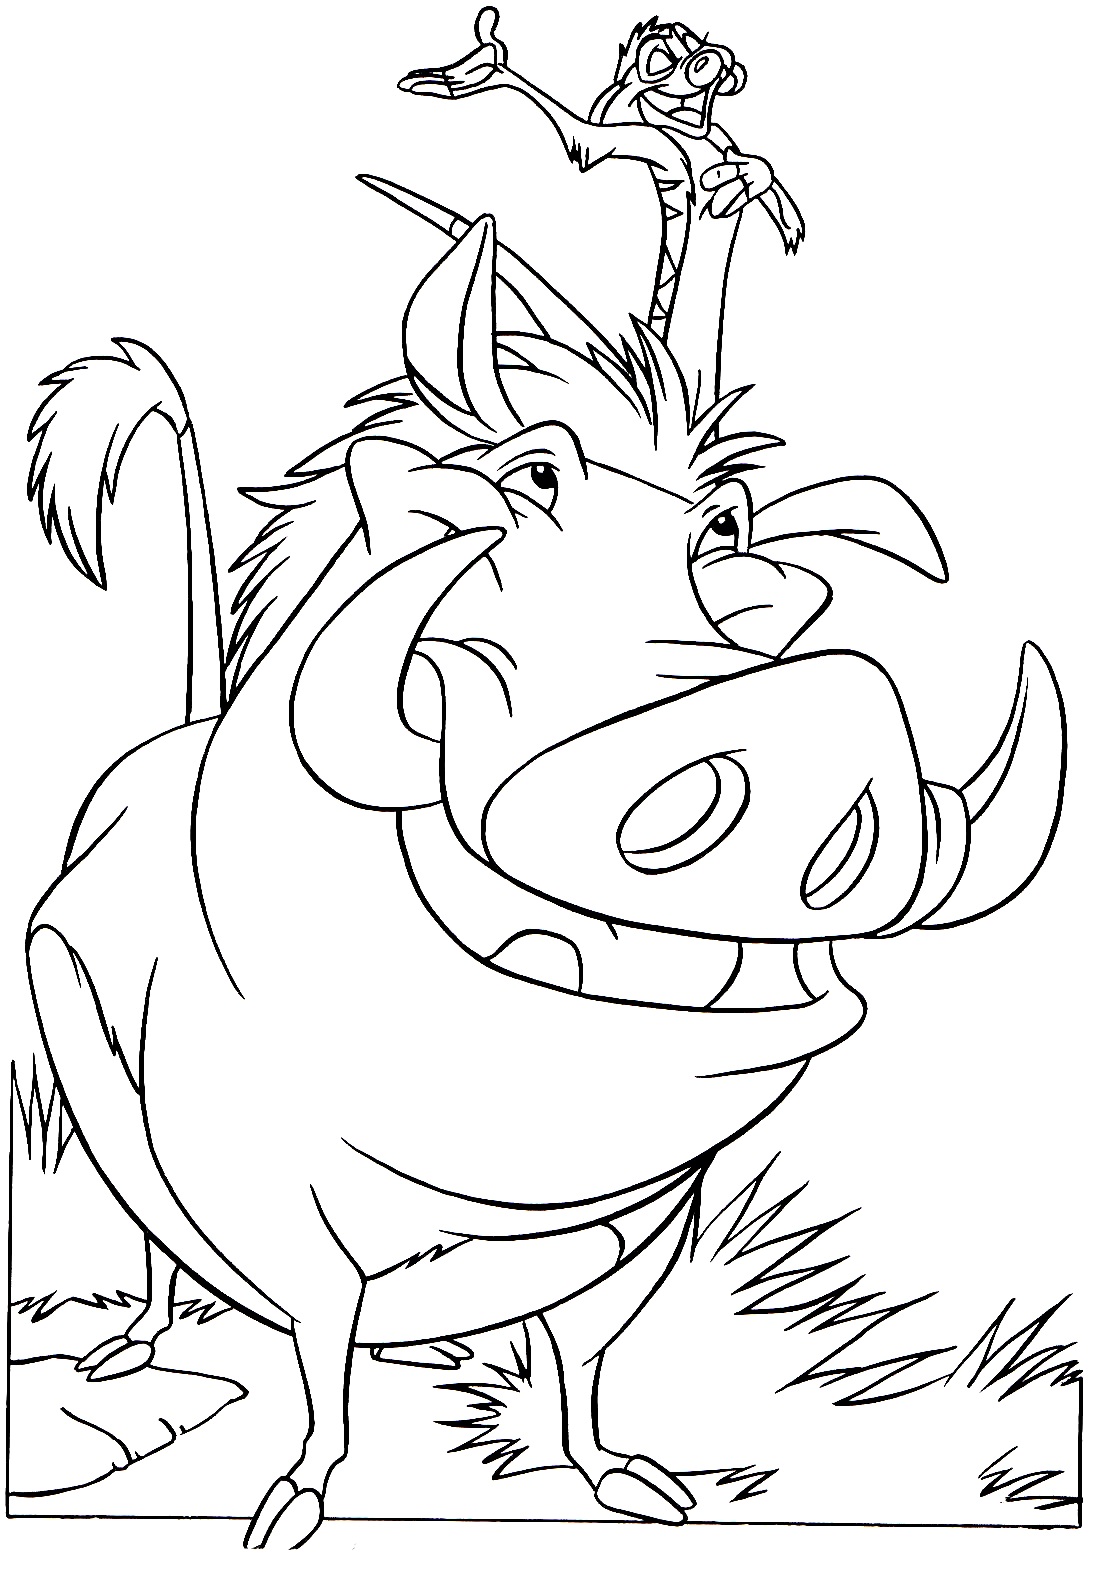 Timon and Pumbaa - The Lion King Kids Coloring Pages